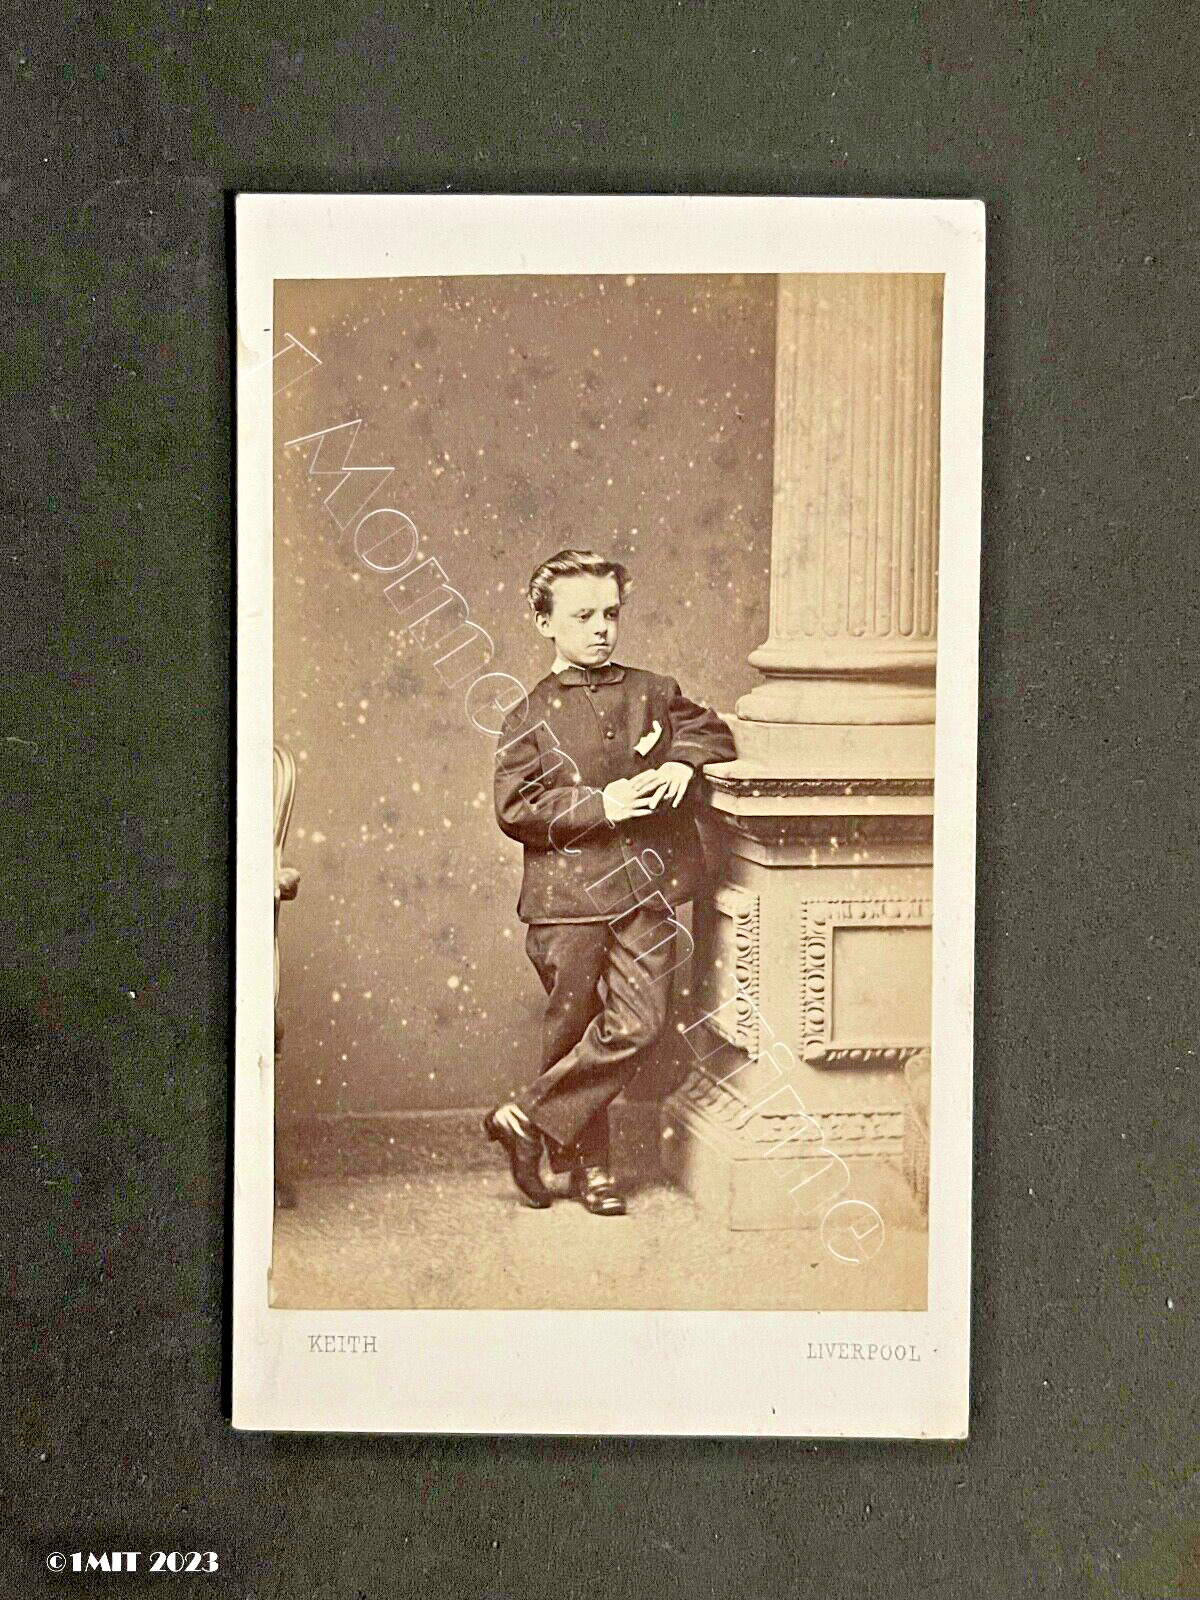 CDV Handsome Boy, by Keith Liverpool Antique Victorian Fashion Photo